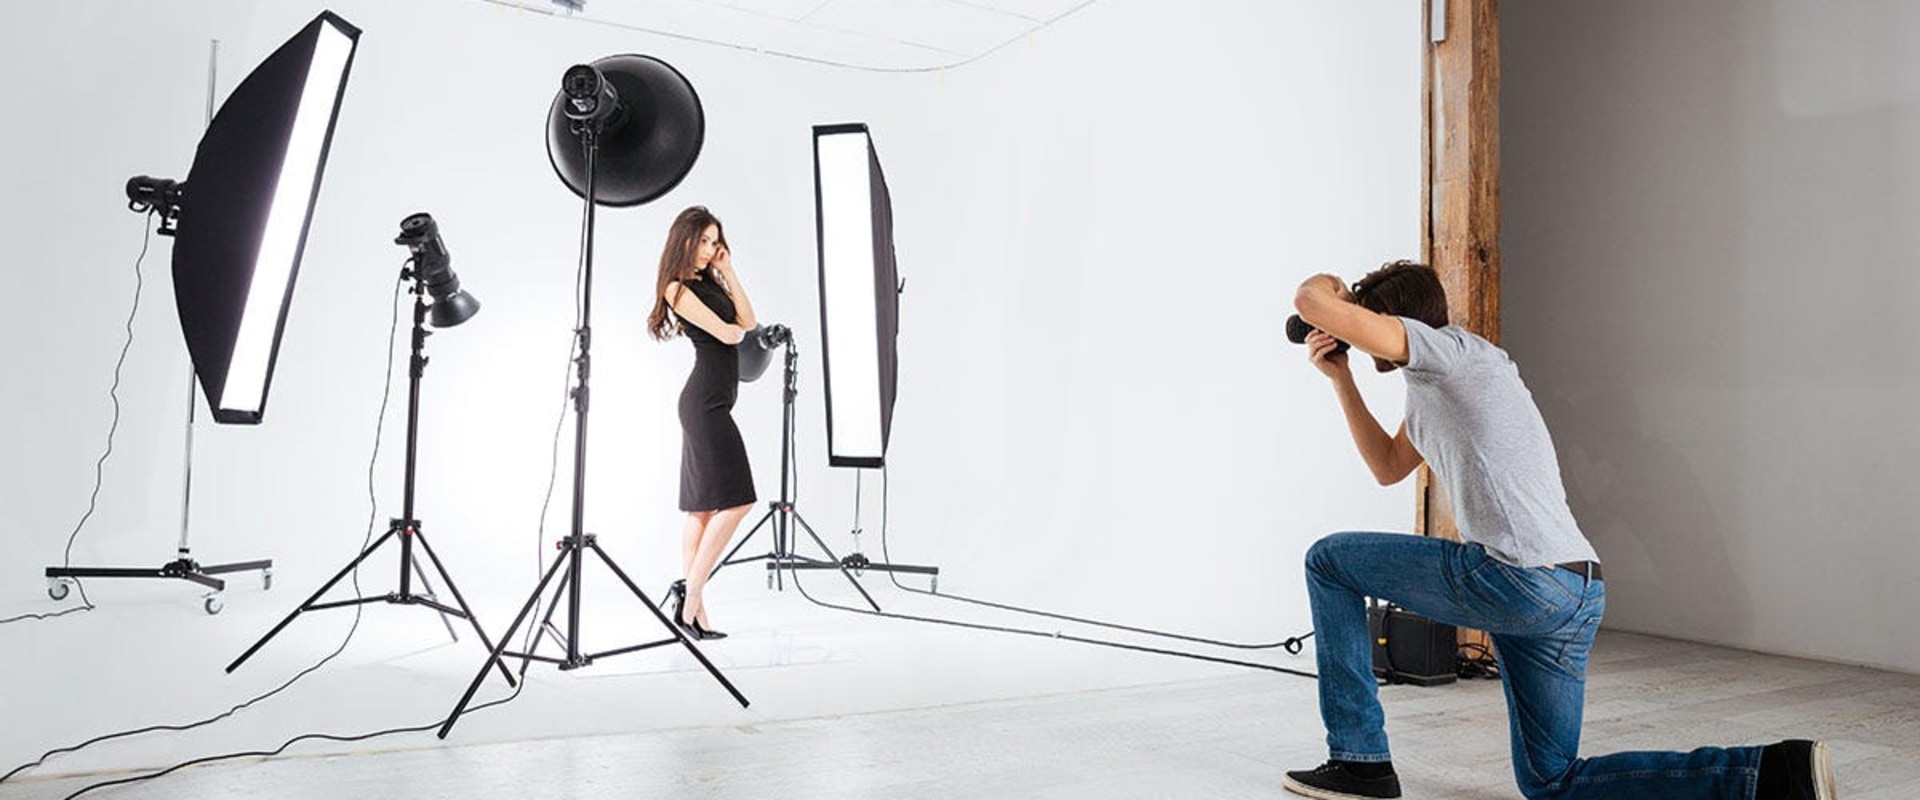 Using Continuous Lighting for Studio Photography